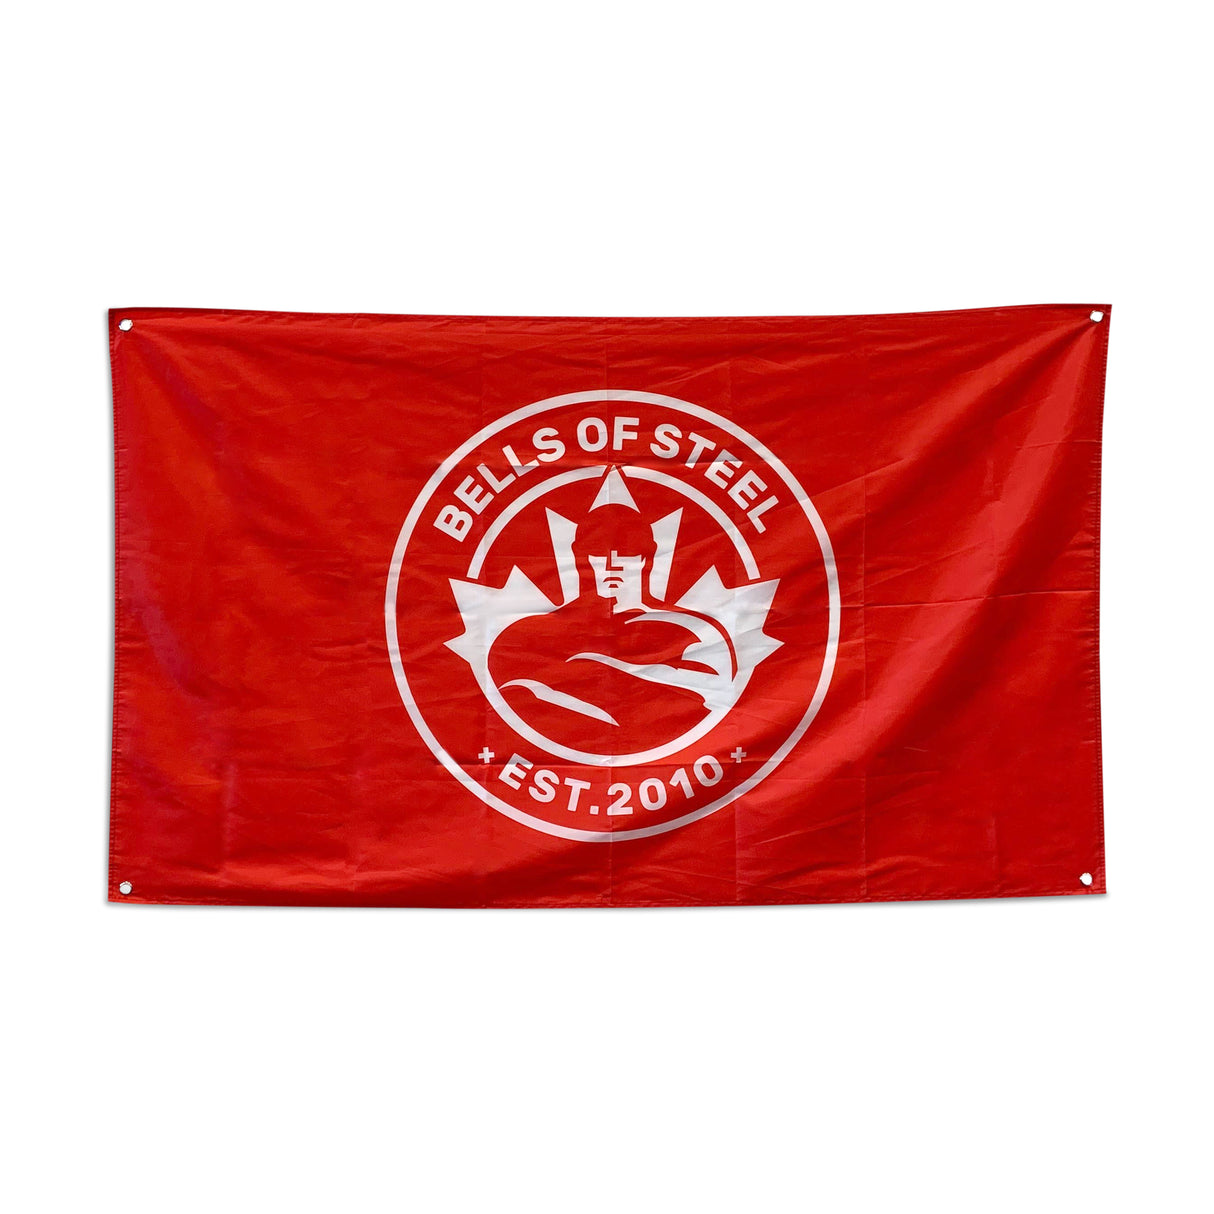 Bells of Steel Canada red Flag